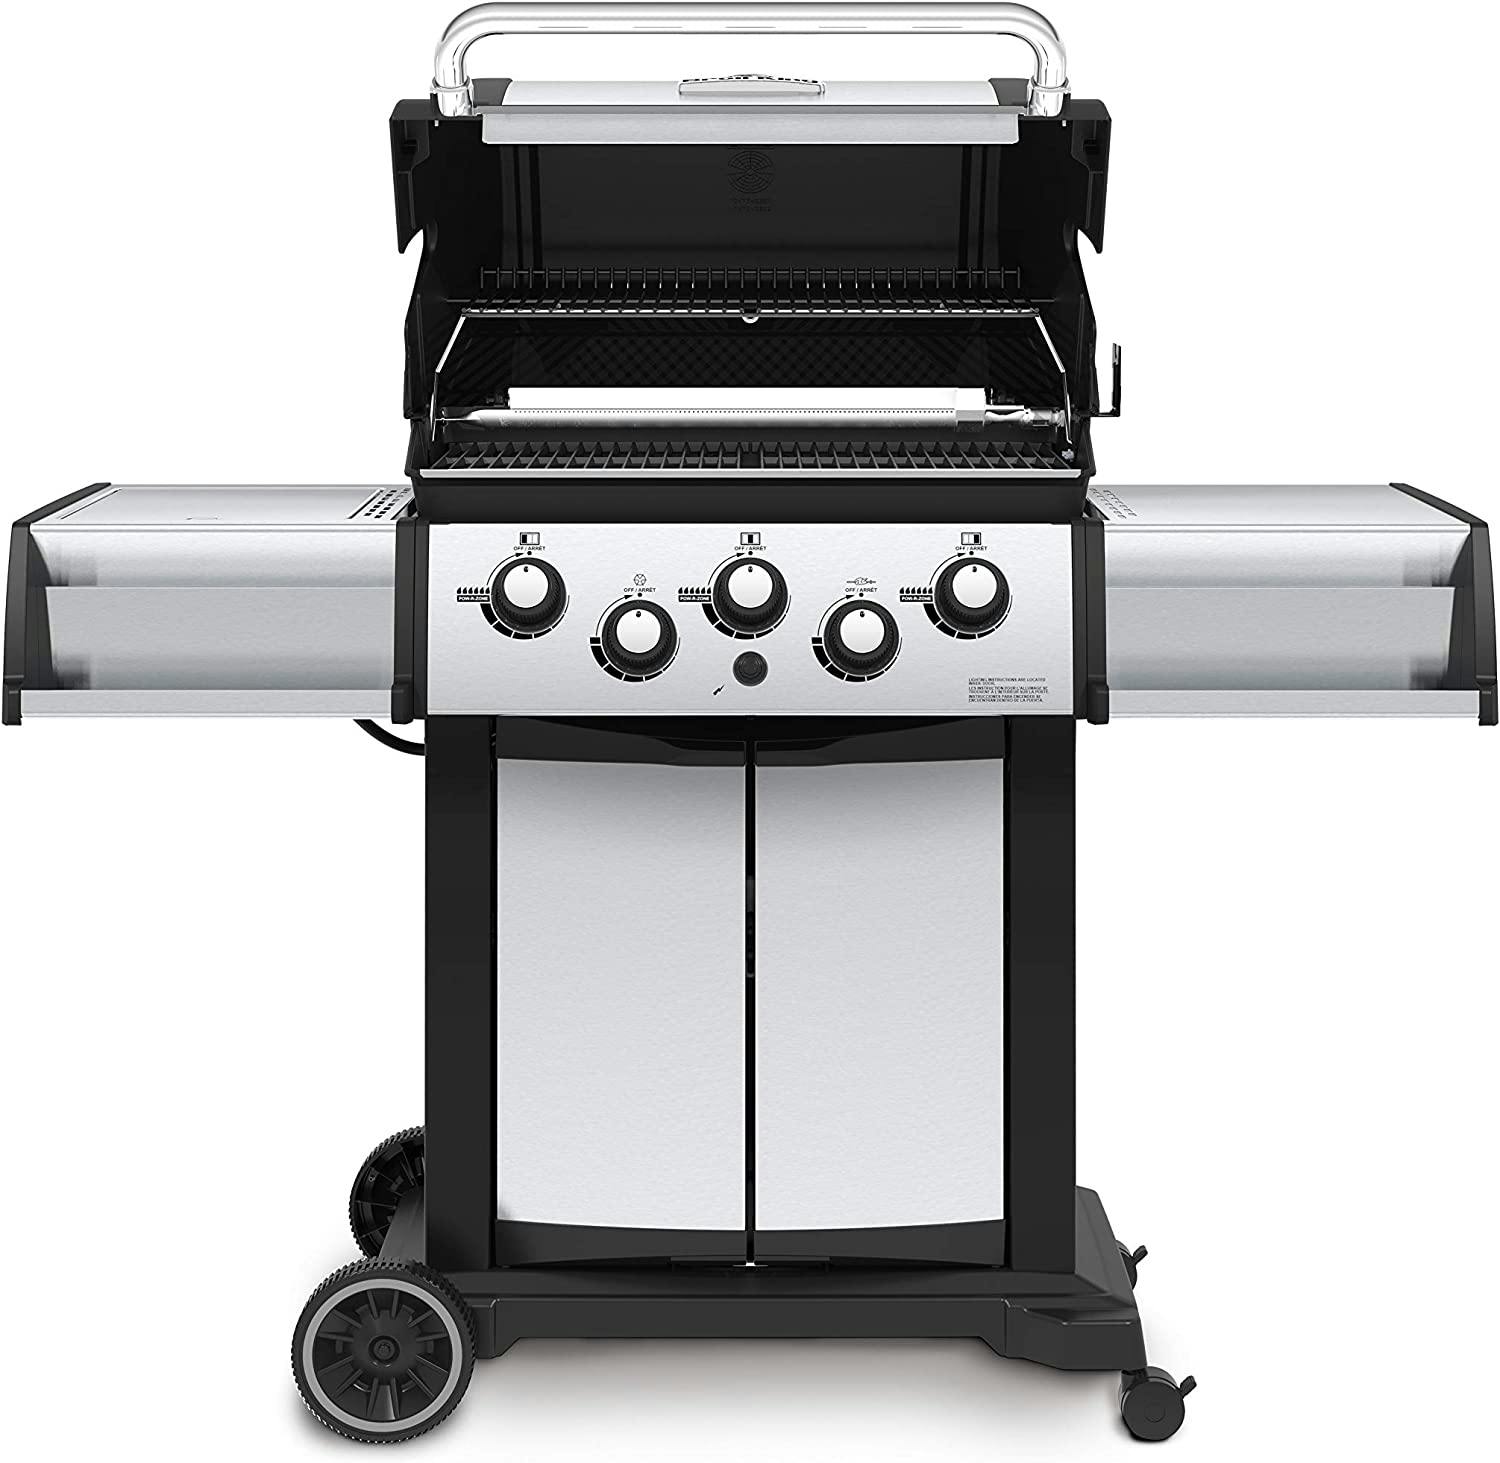 Broil King Signet Gas Grill